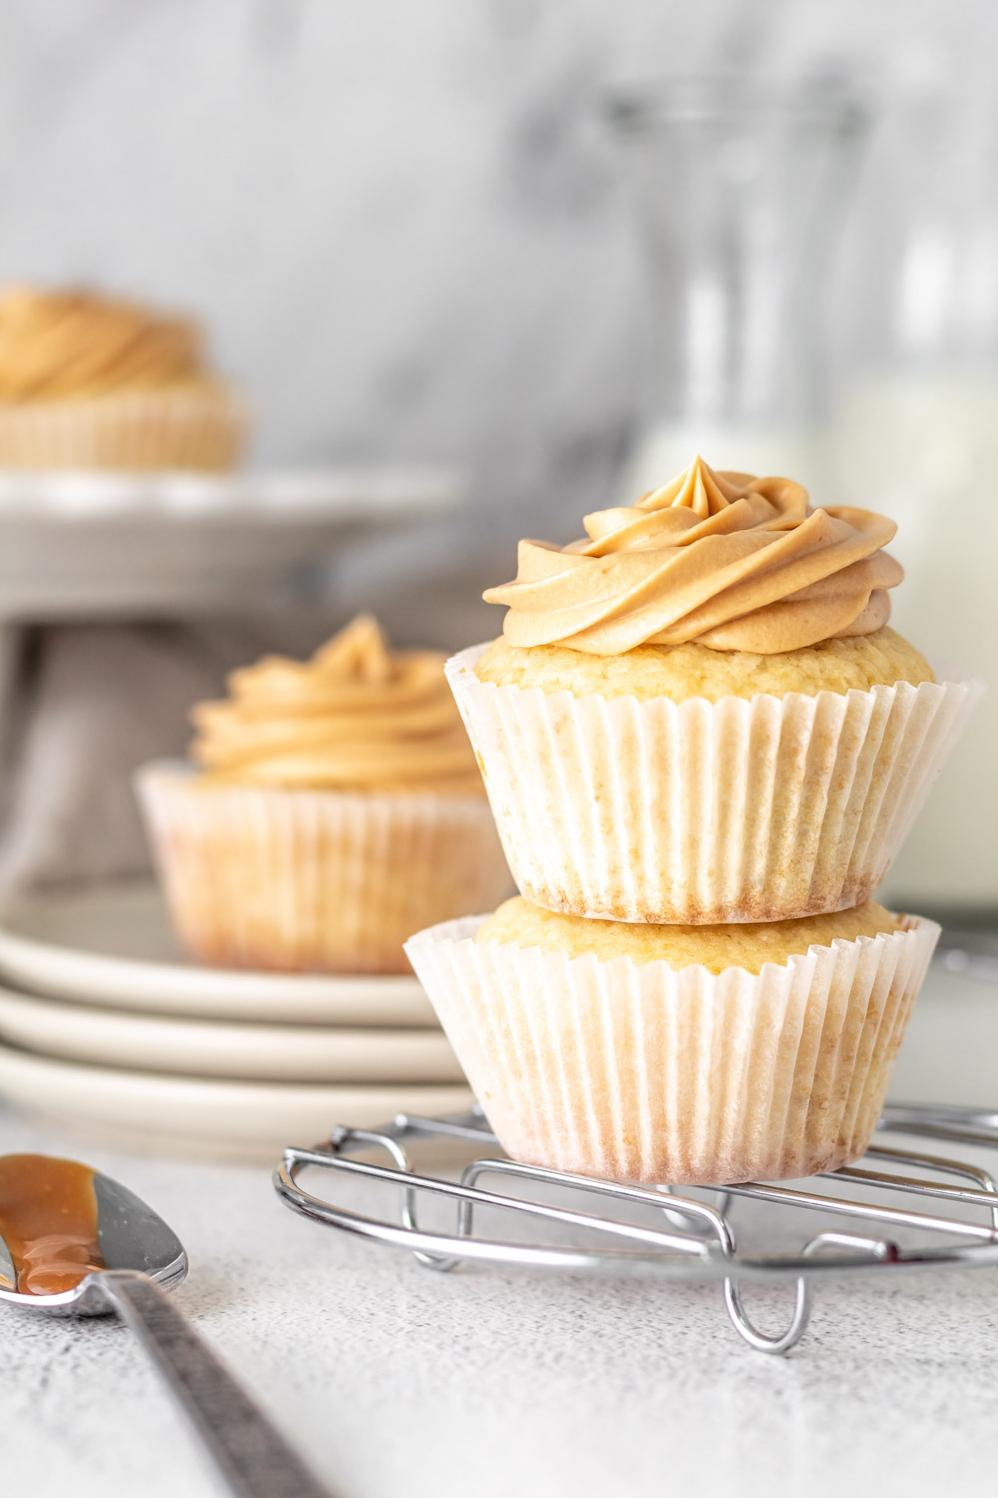  These cupcakes are the perfect balance of rich, caramel flavors with a subtle touch of sweetness.